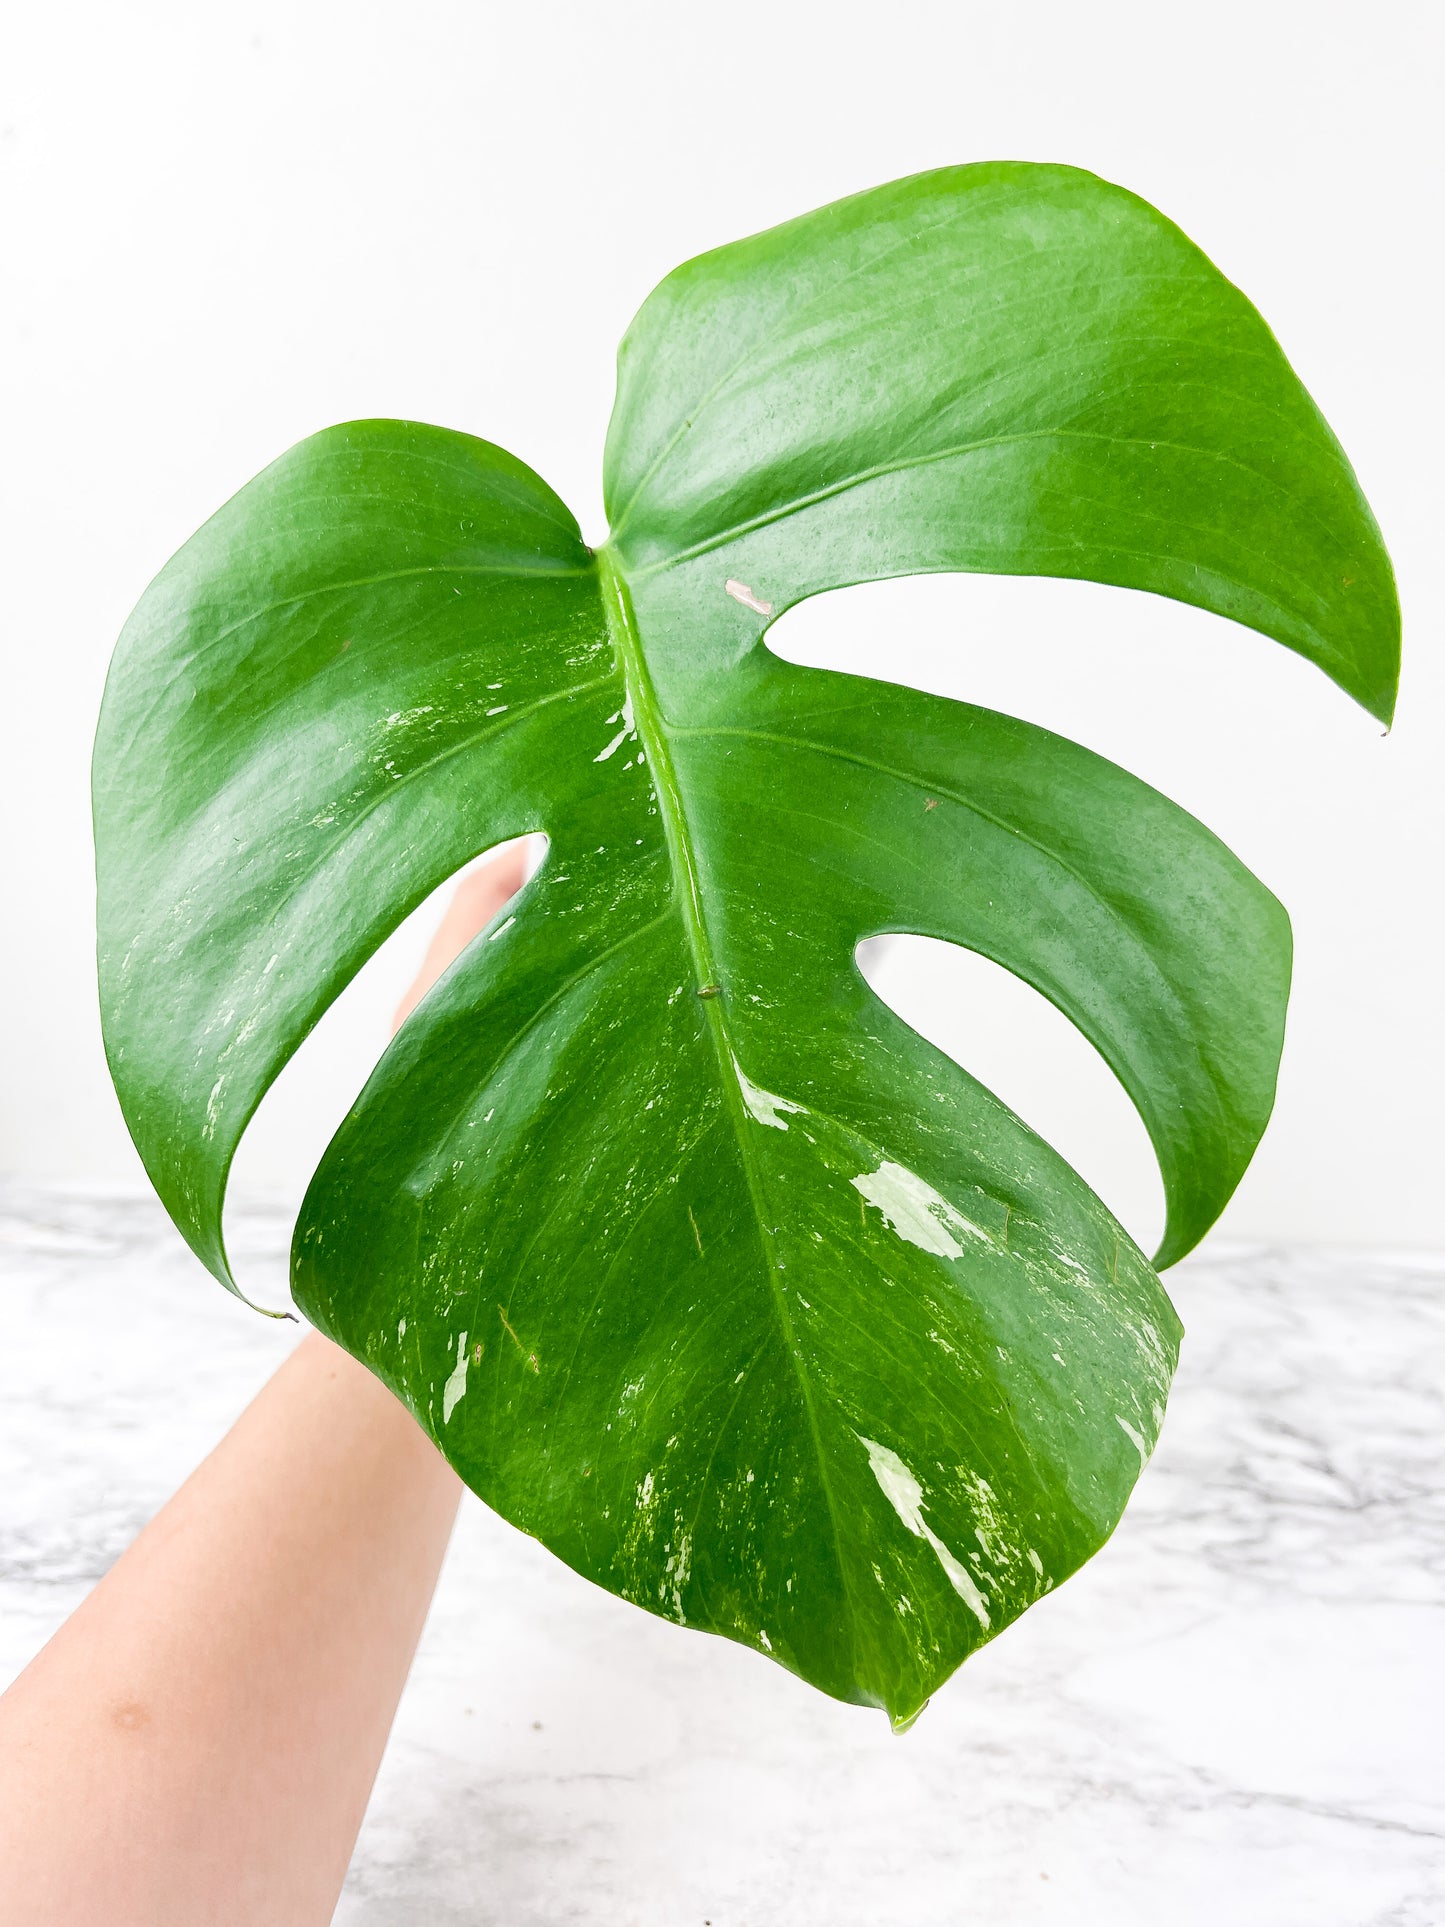 Monstera Albo Borsigiana1 leaf Rooted Coming from a rare selected  mother plant (Read description)